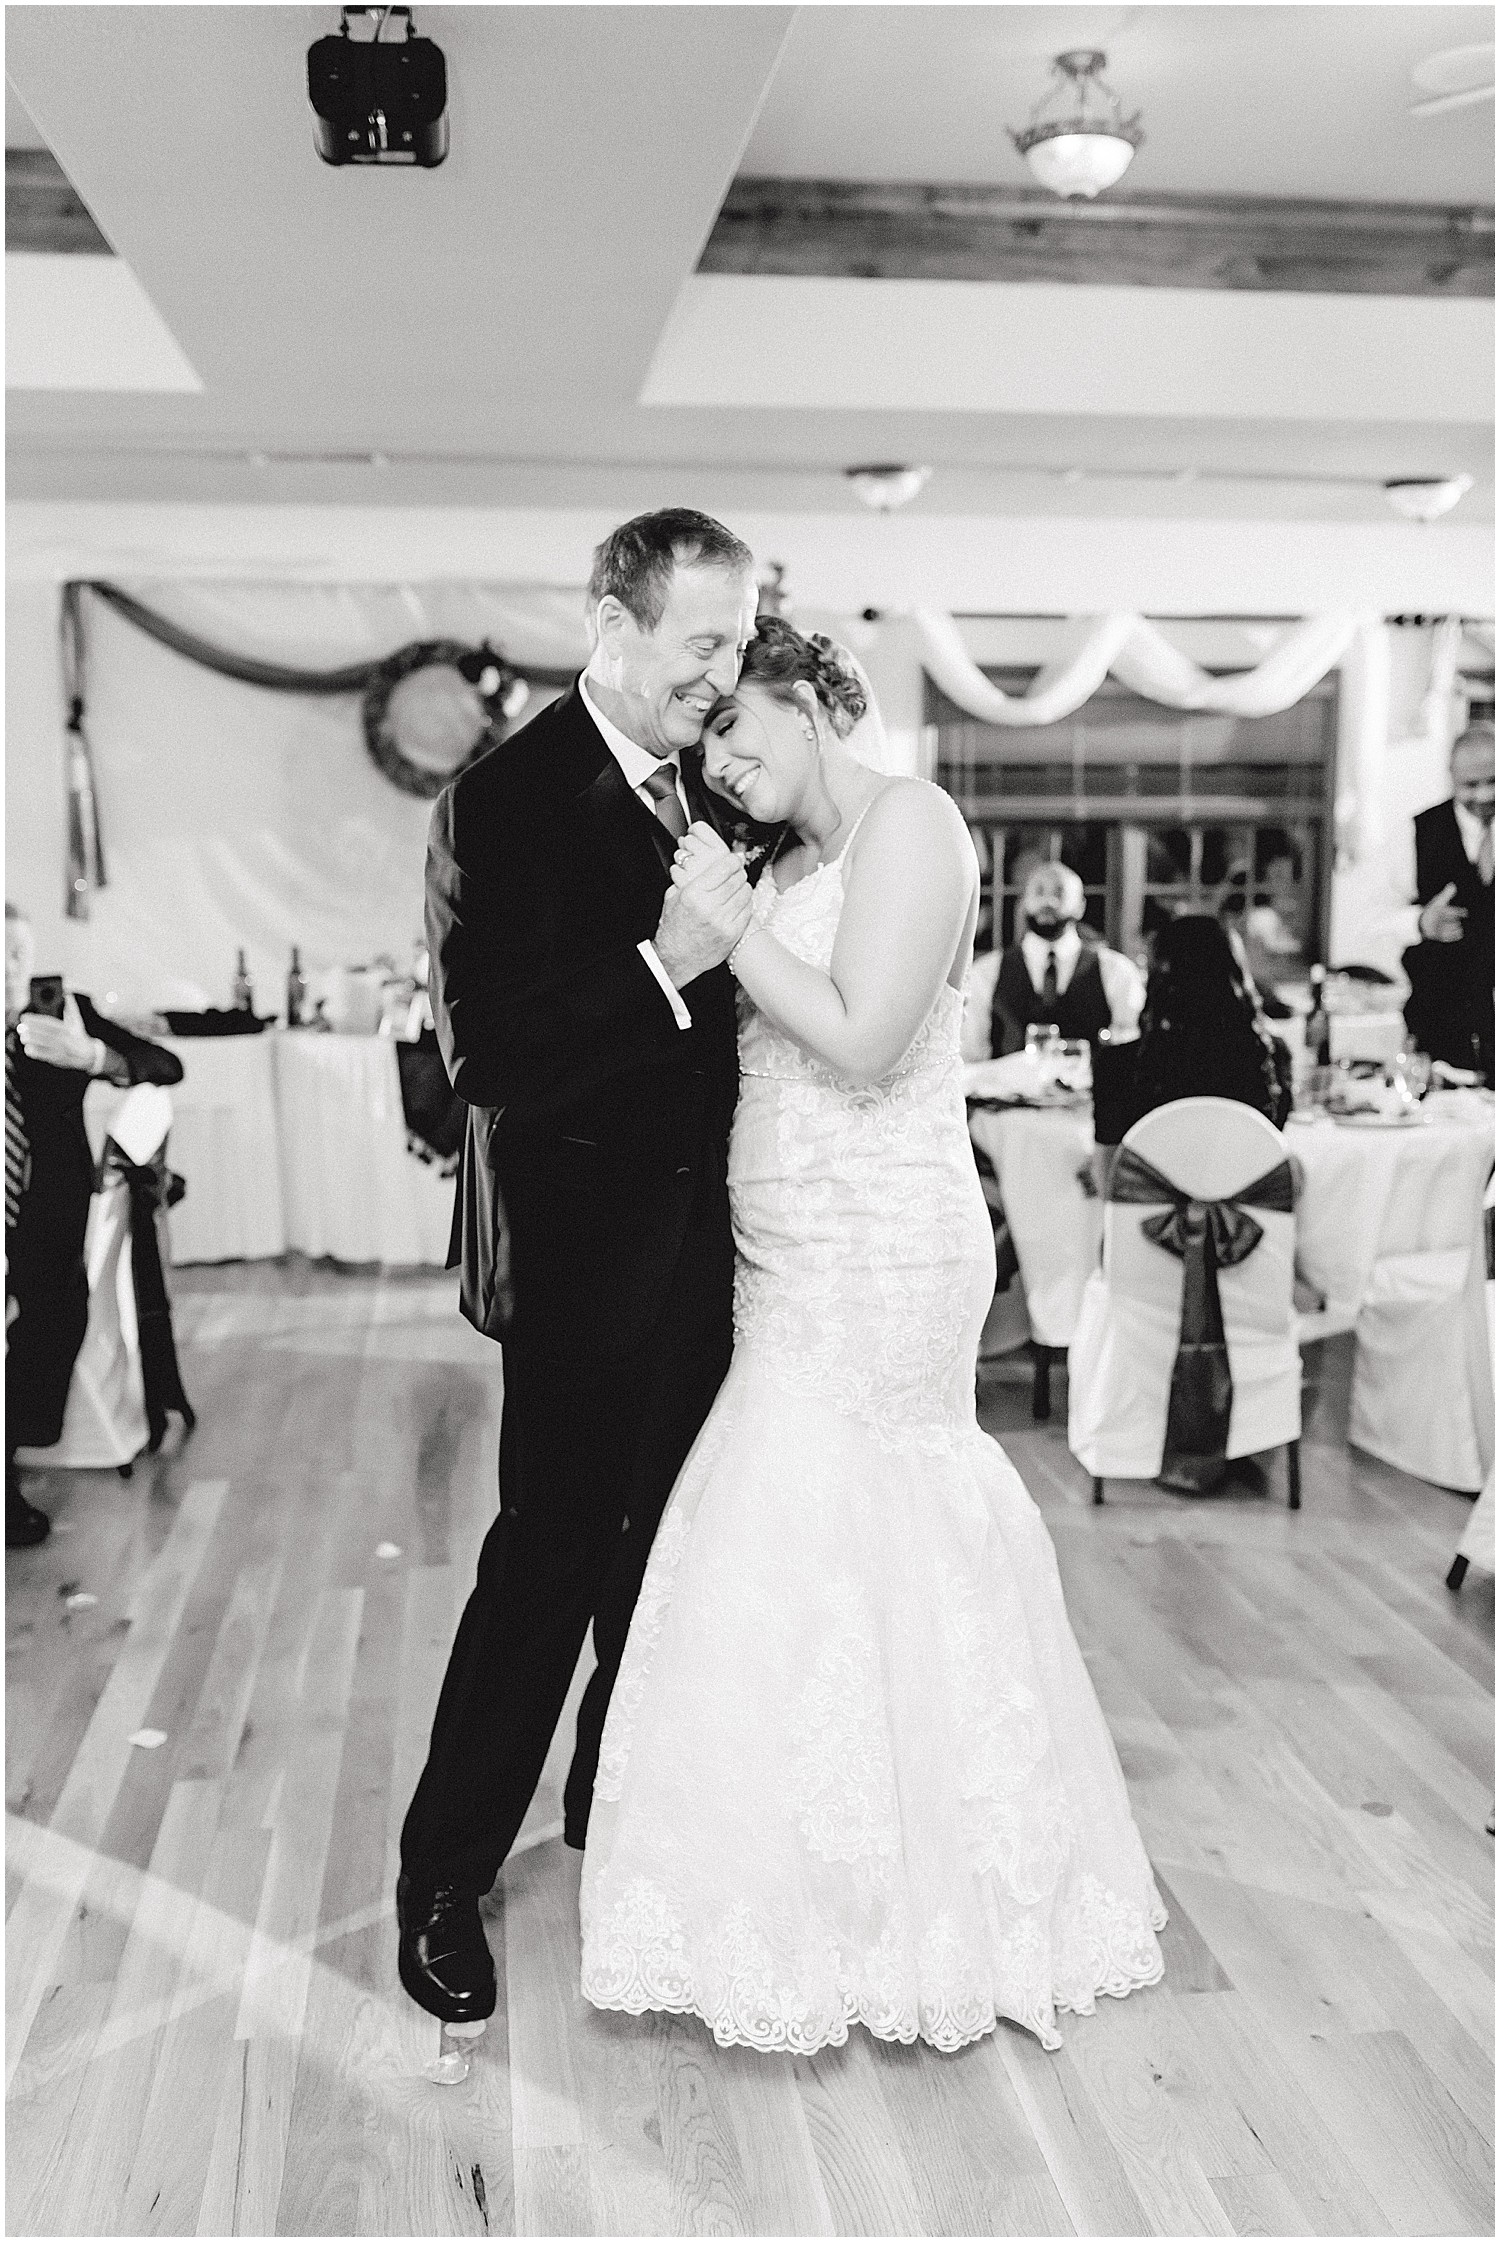 bride and dad first dance during wedding reception in black and white